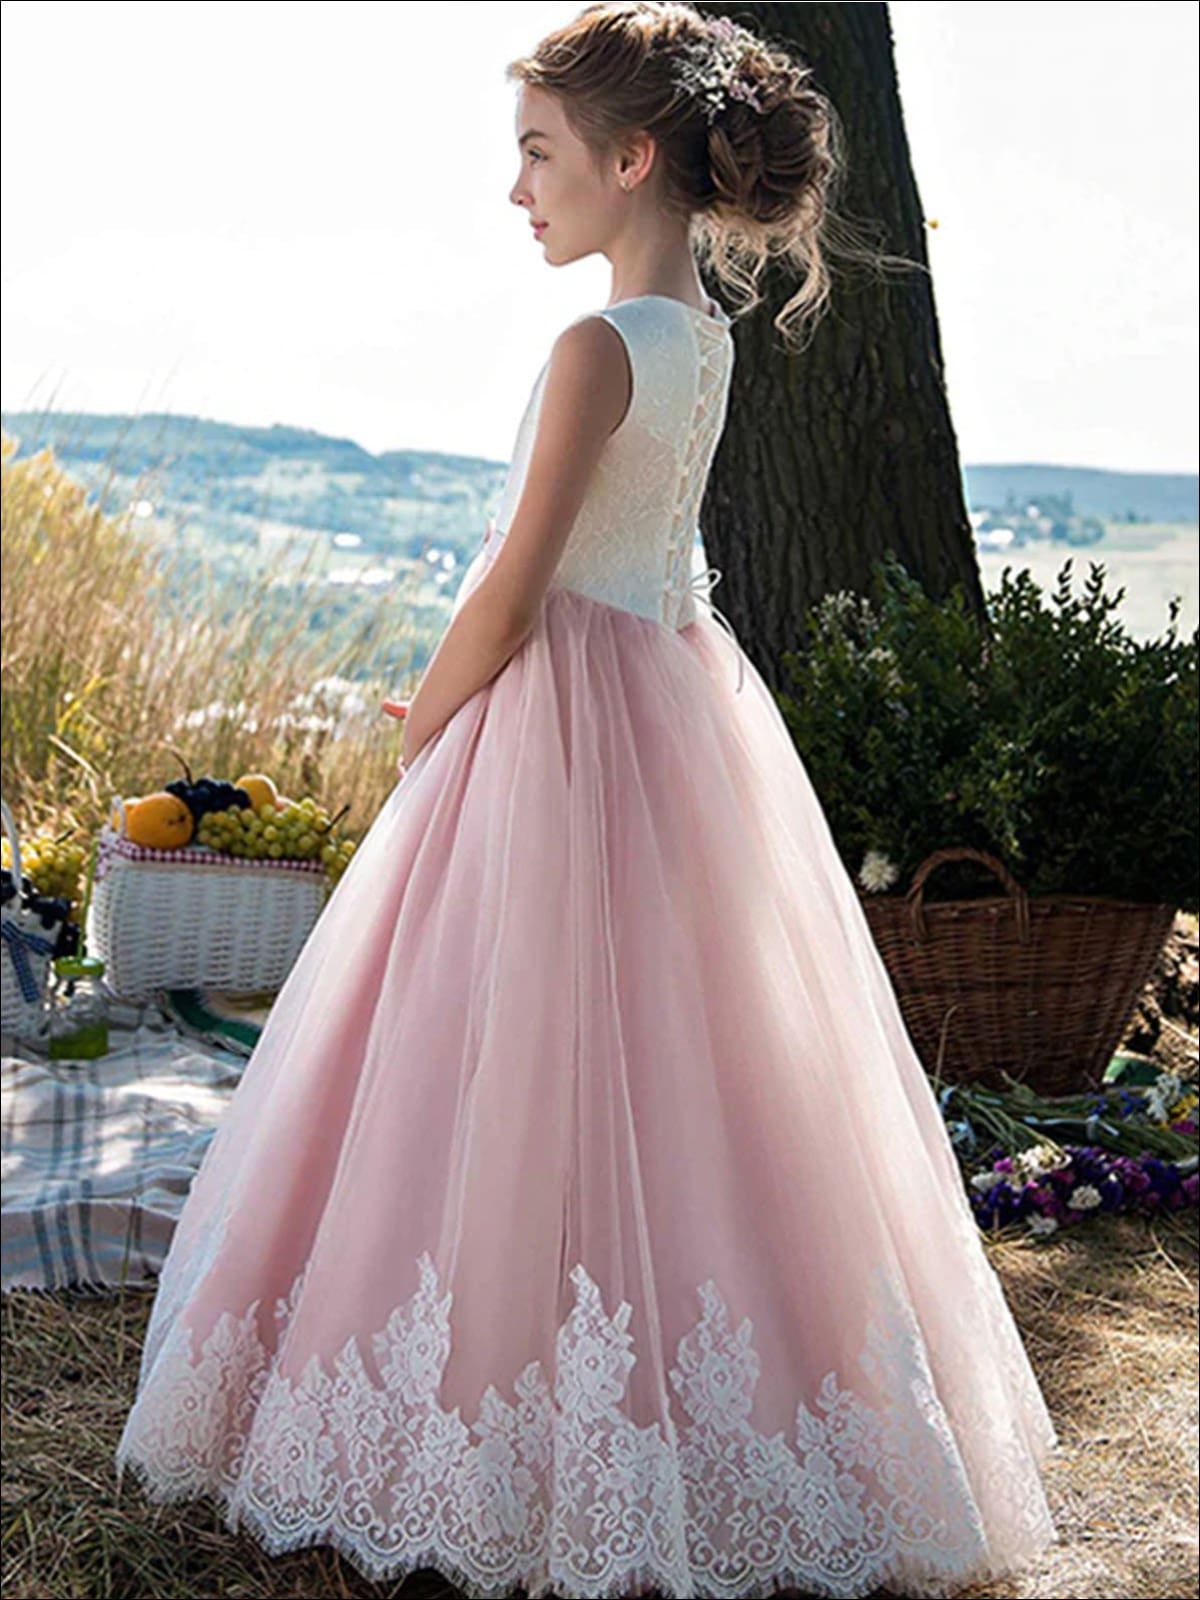 Girls Special Occasion Dress | Lace Sleeve Embroidered Communion Gown